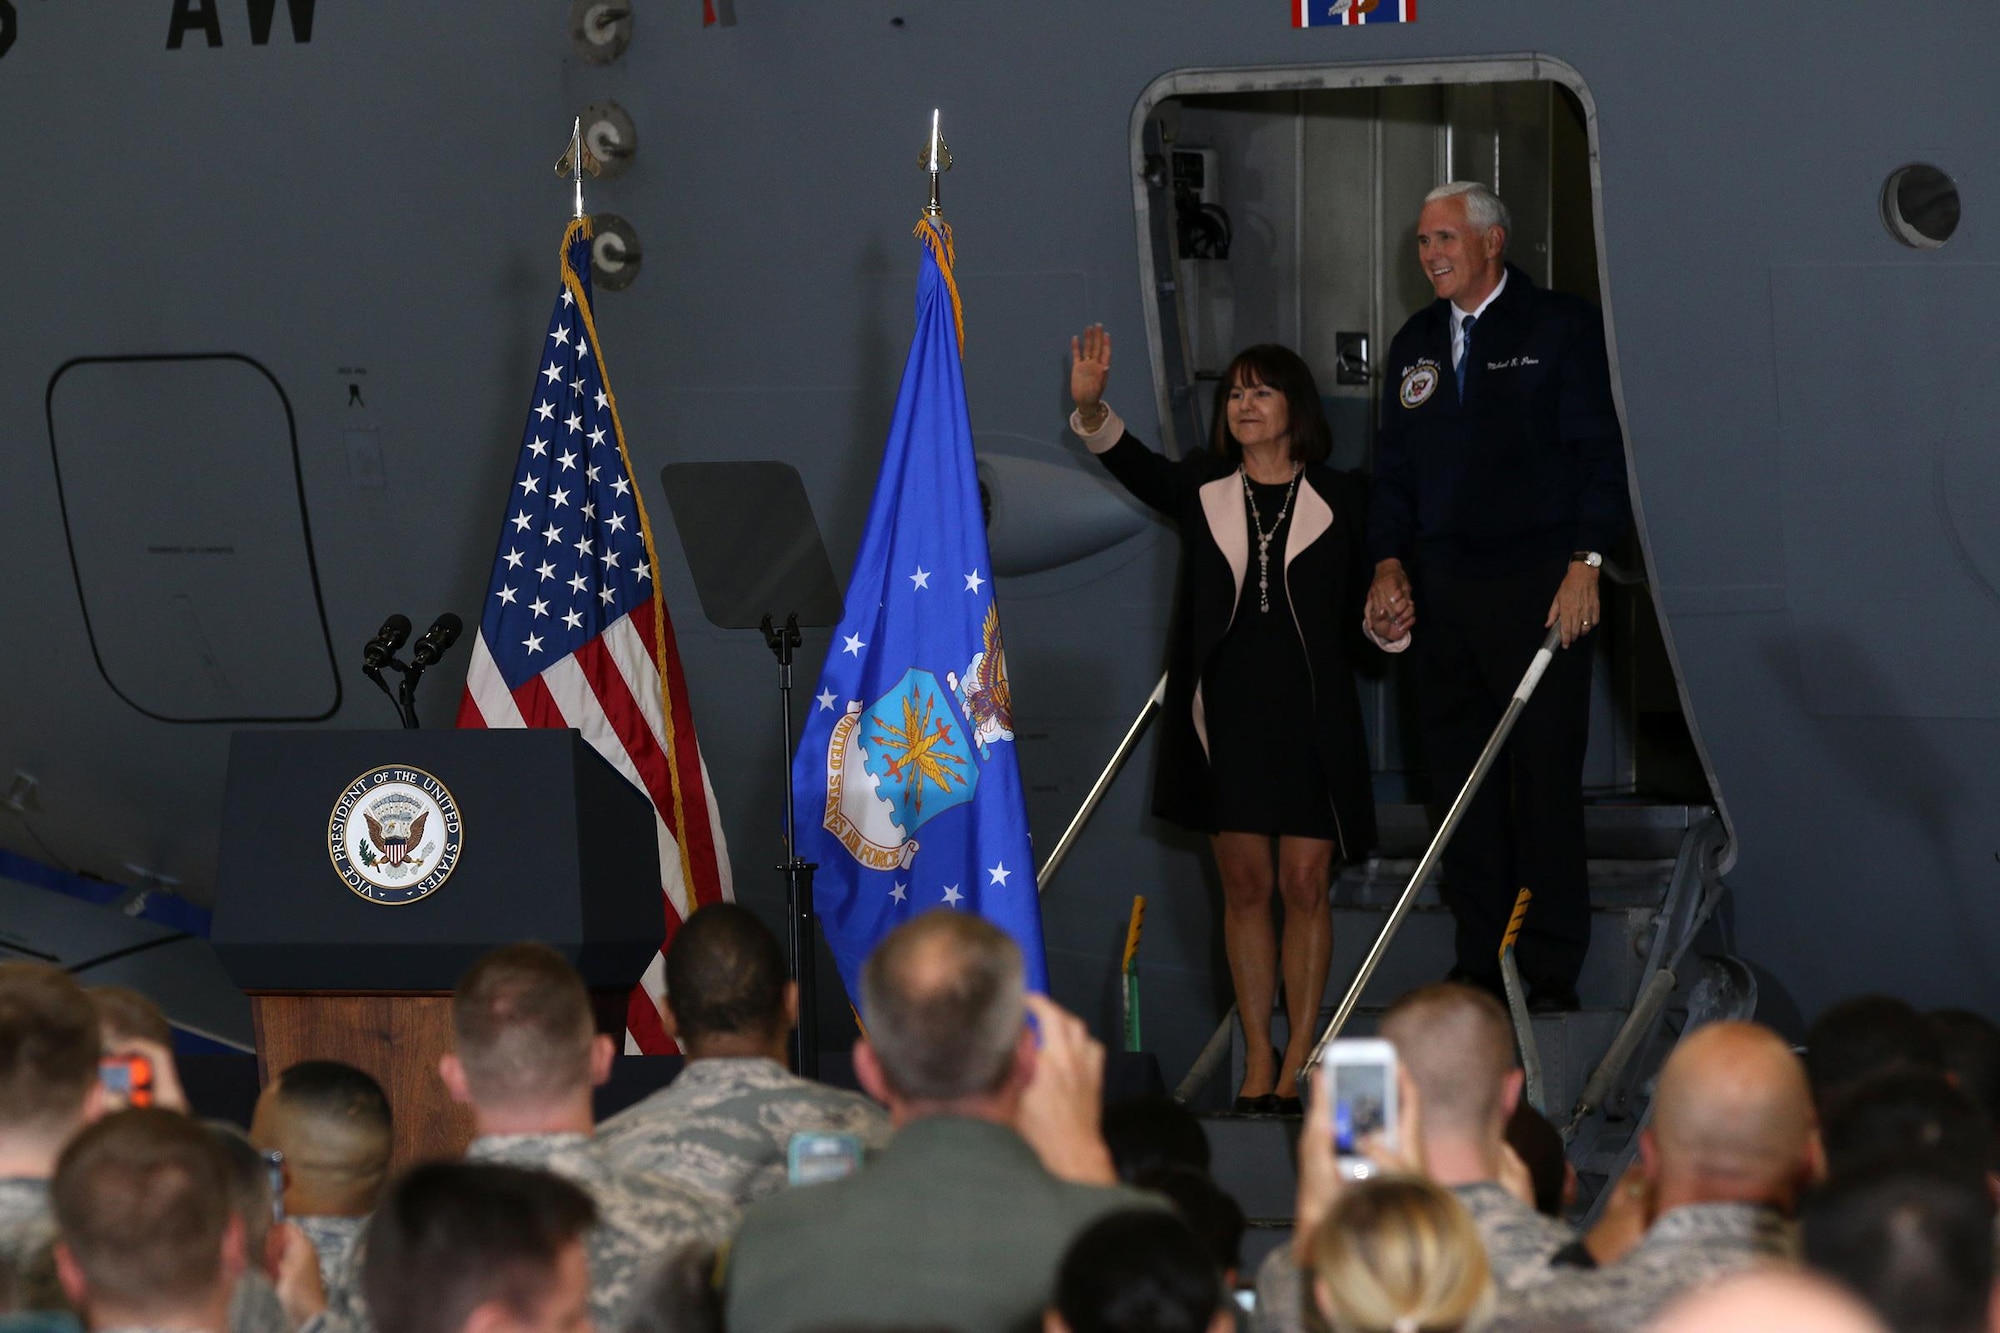 Vice President Mike Pence and his wife Karen wave to military members inside a 445th Airlift Wing hangar as they arrive to greet Airmen and their families, May 20, 2017 . The vice president visited Wright-Patterson Air Force Base to speak to approximately 250 Airmen and families to commemorate Armed Forces Day. (U.S. Air Force photo/Tech. Sgt. Patrick O’Reilly)